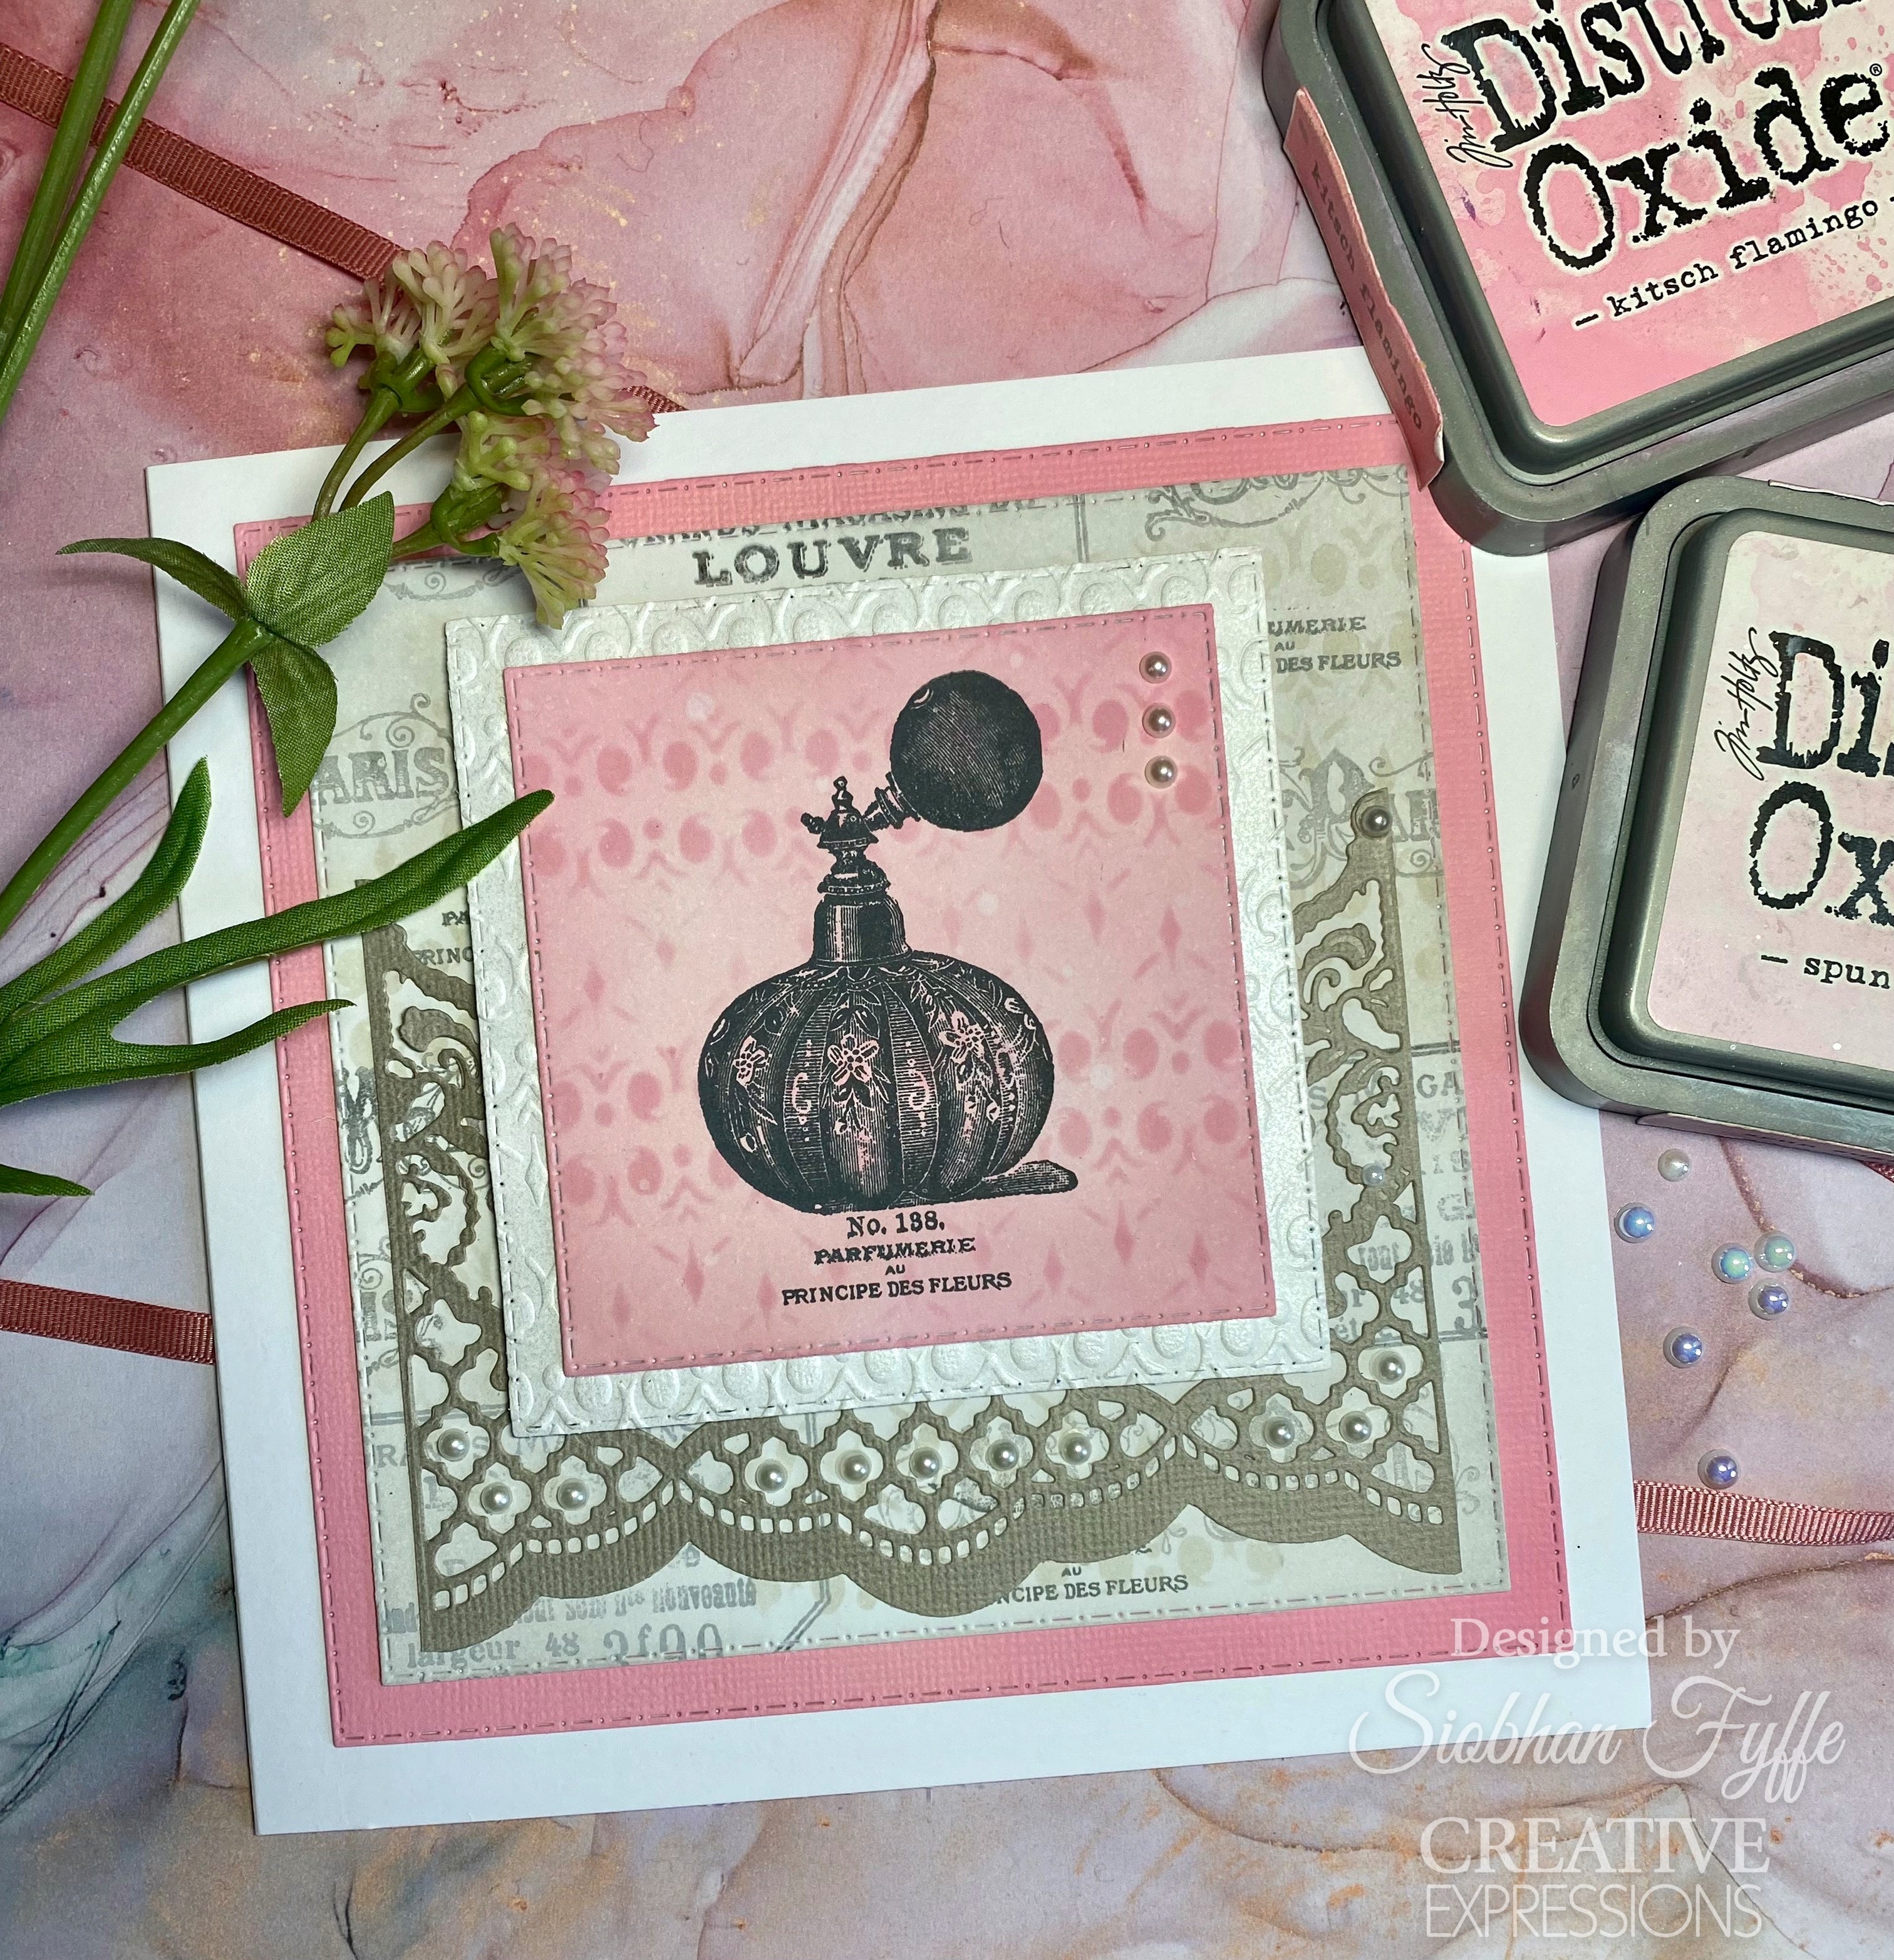 Creative Expressions Taylor Made Journals Haute Couture 6 in x 8 in Clear Stamp Set